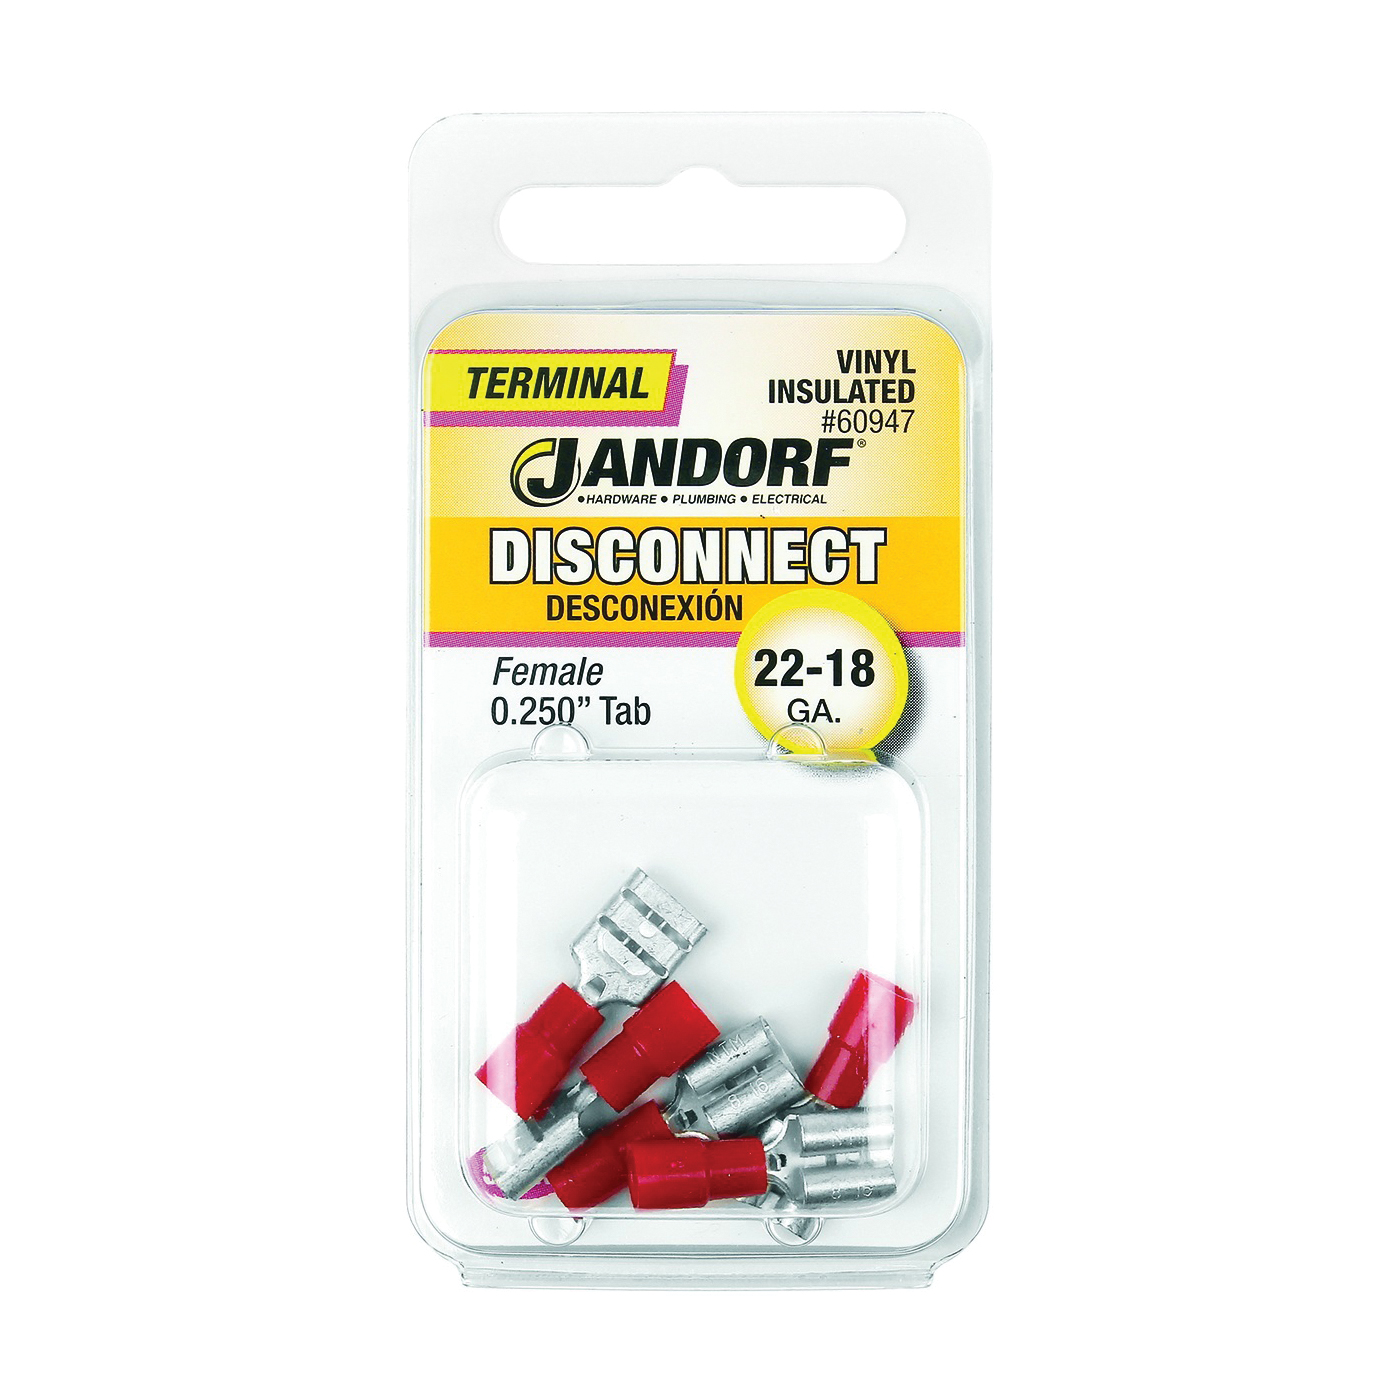 Jandorf 60947 Disconnect Terminal, 22 to 18 AWG Wire, Vinyl Insulation, Copper Contact, Red, 5/PK